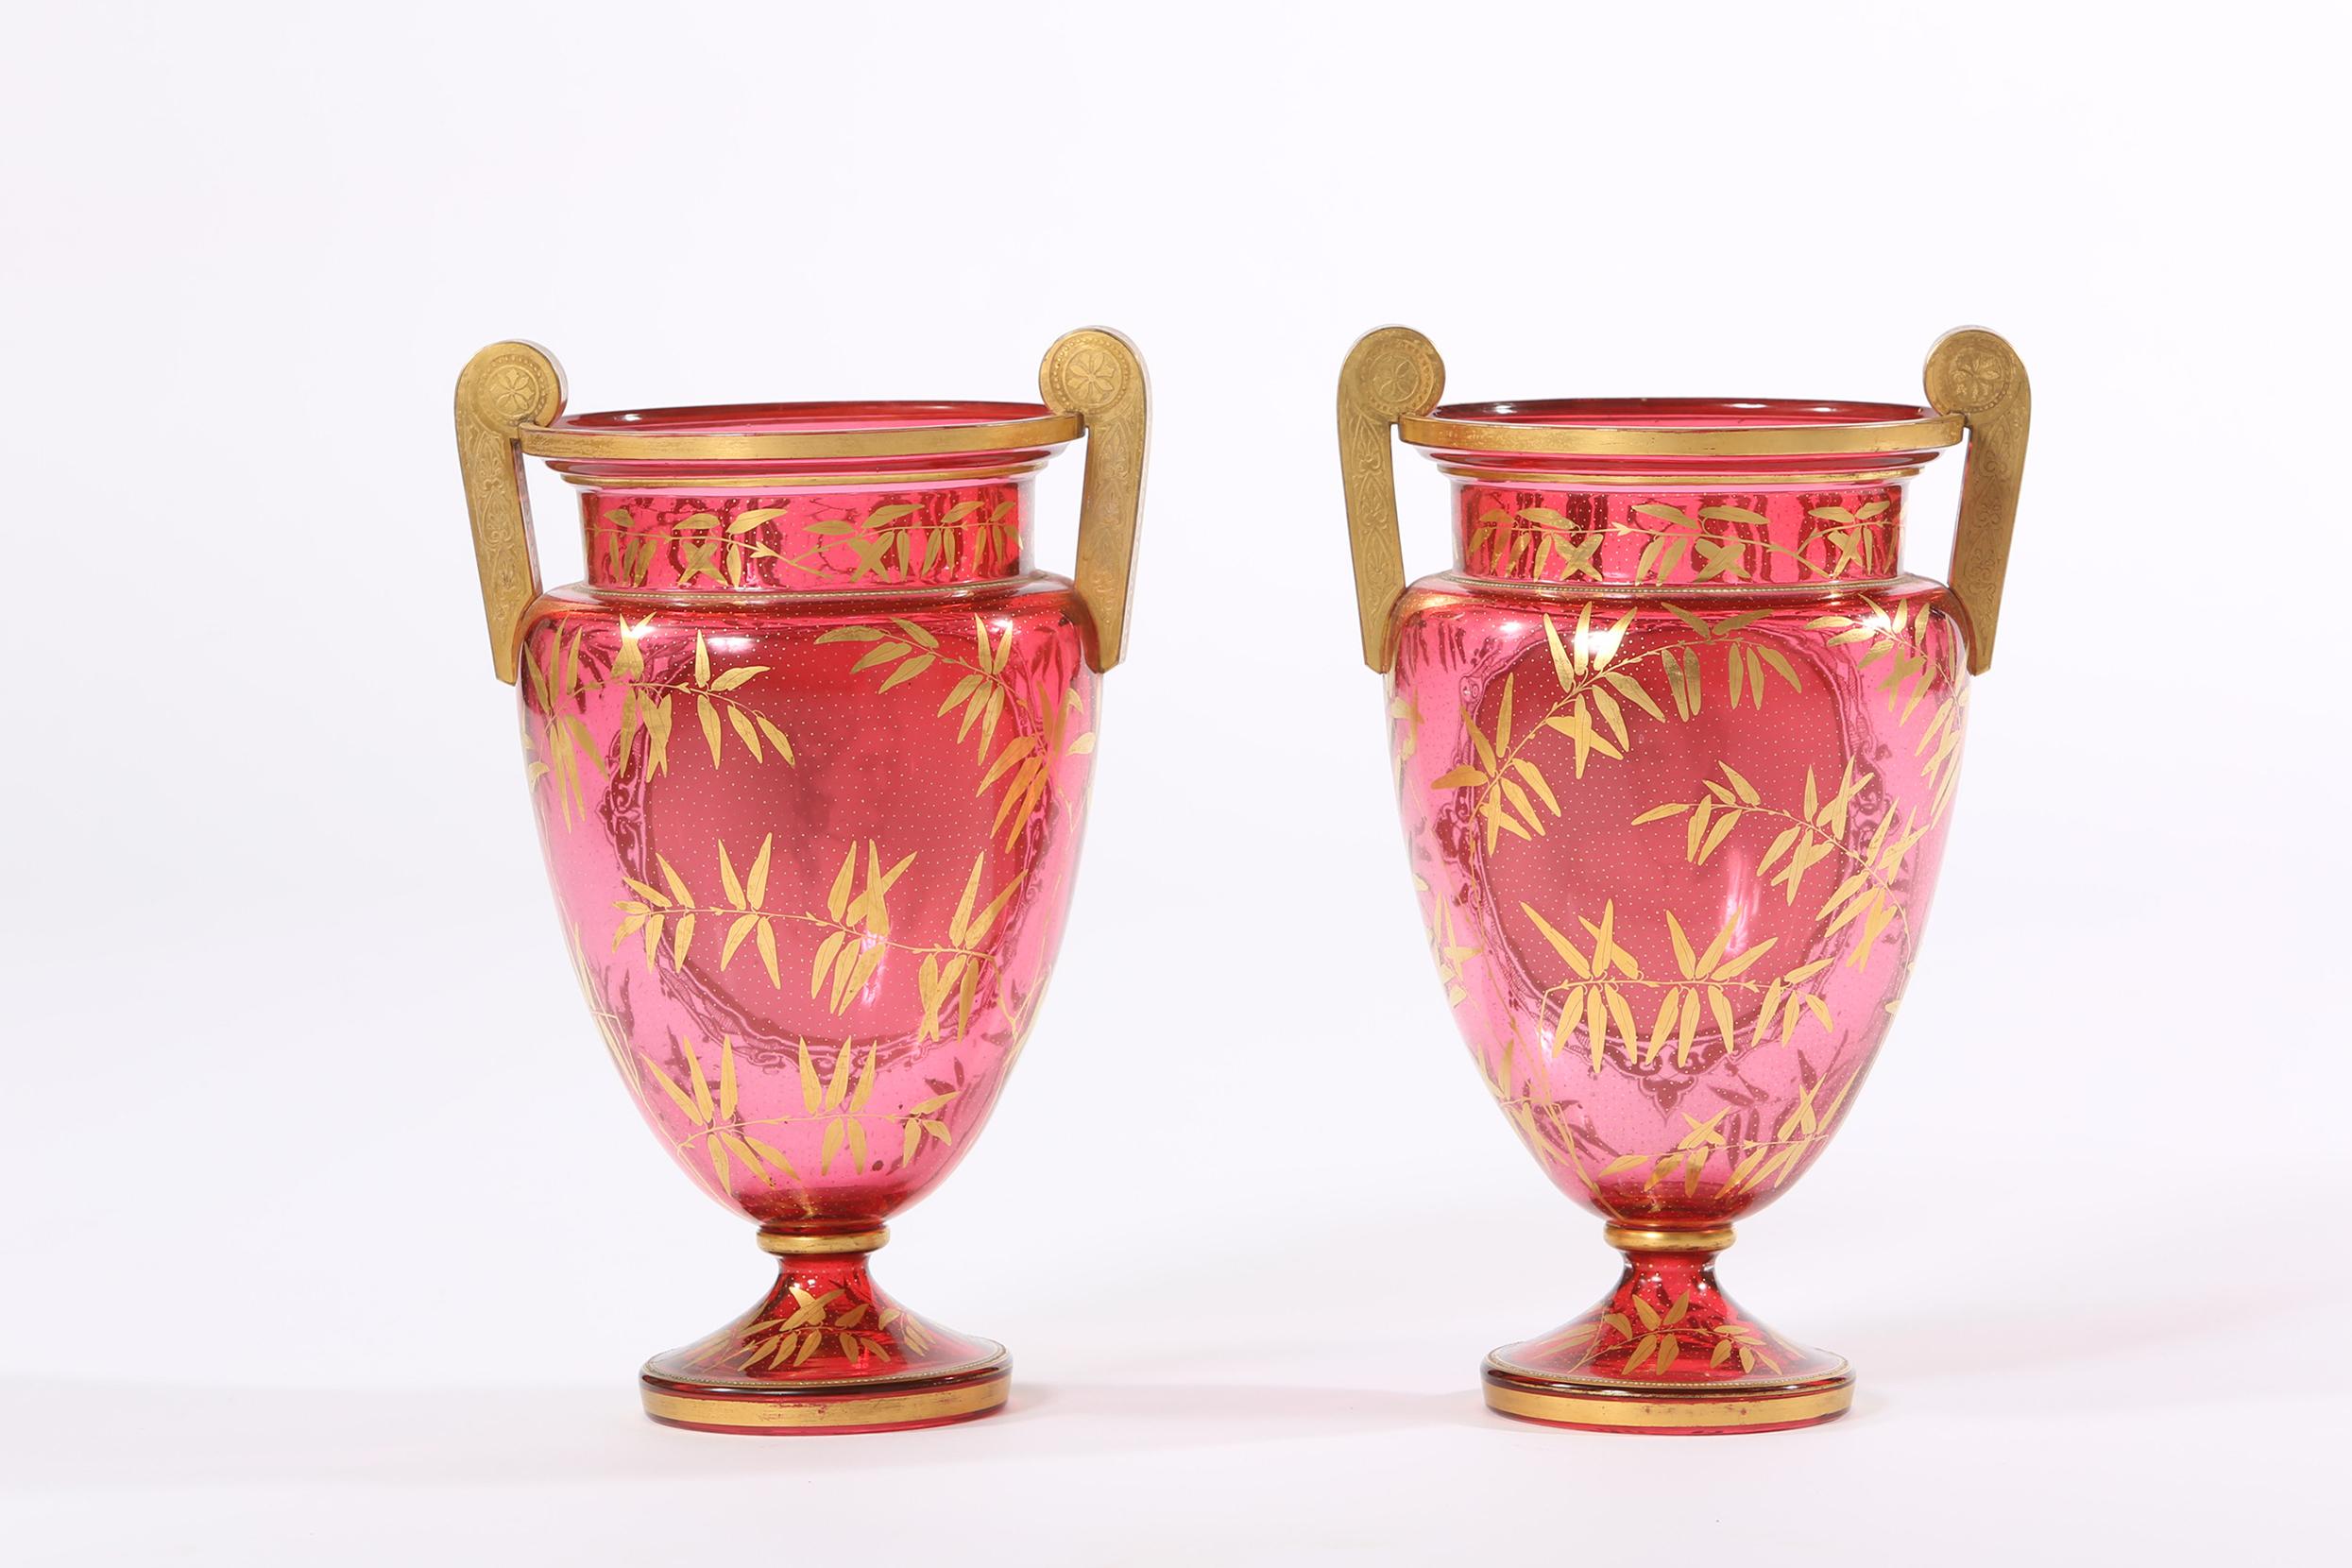 Early 19th century pair of gilt gold glass design details vase or urn with side handles. Each vase is in great antique condition with appropriate wear consistent with age or use. Each vase stand about 11 inches high x 8 inches diameter.